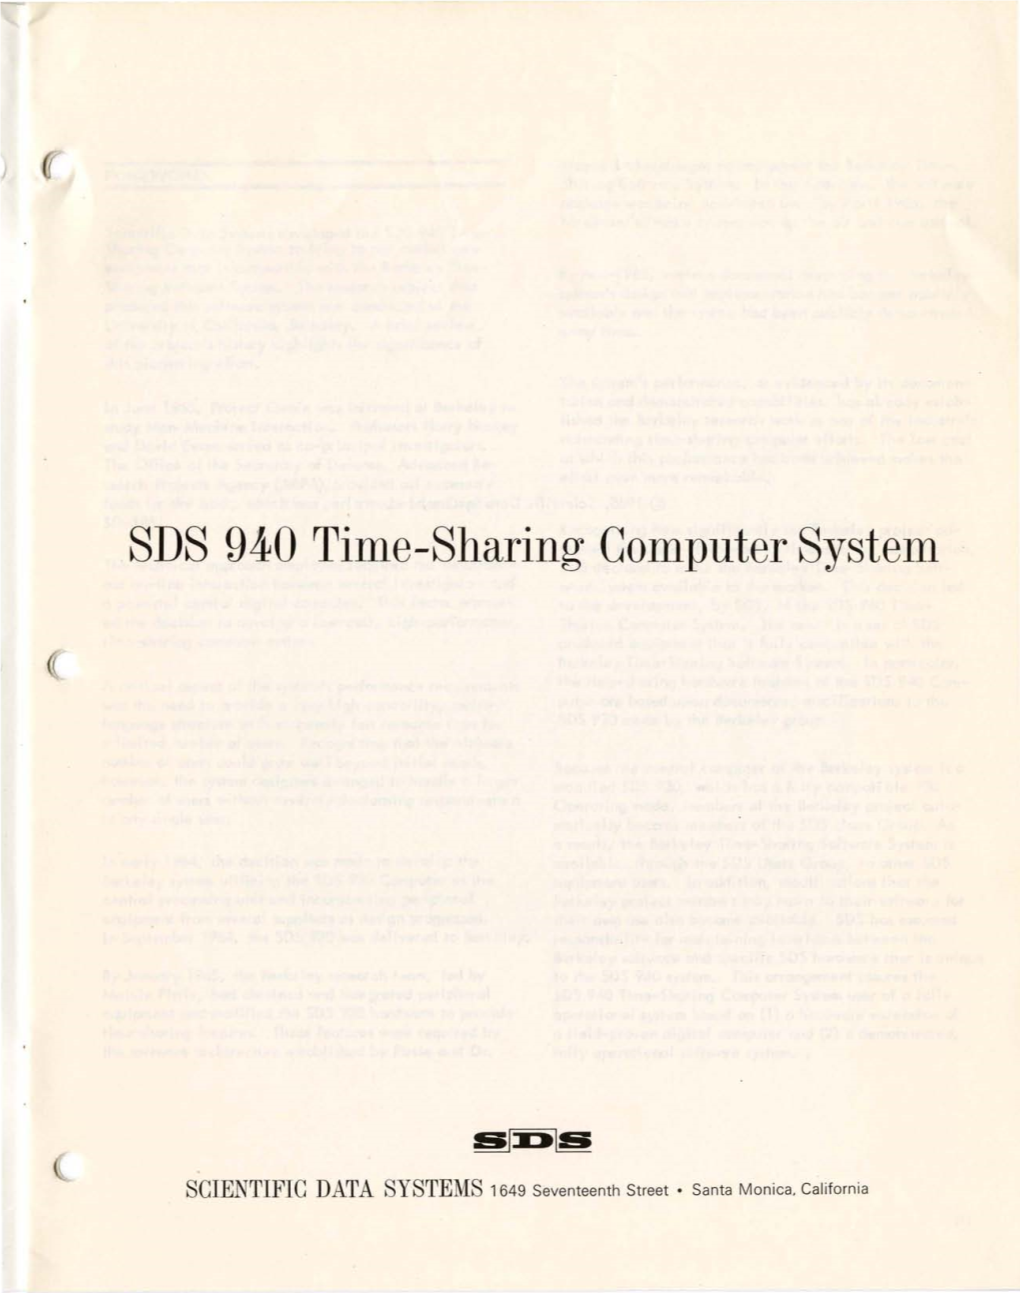 SDS 940 Time-Sharing Computer System, 1965